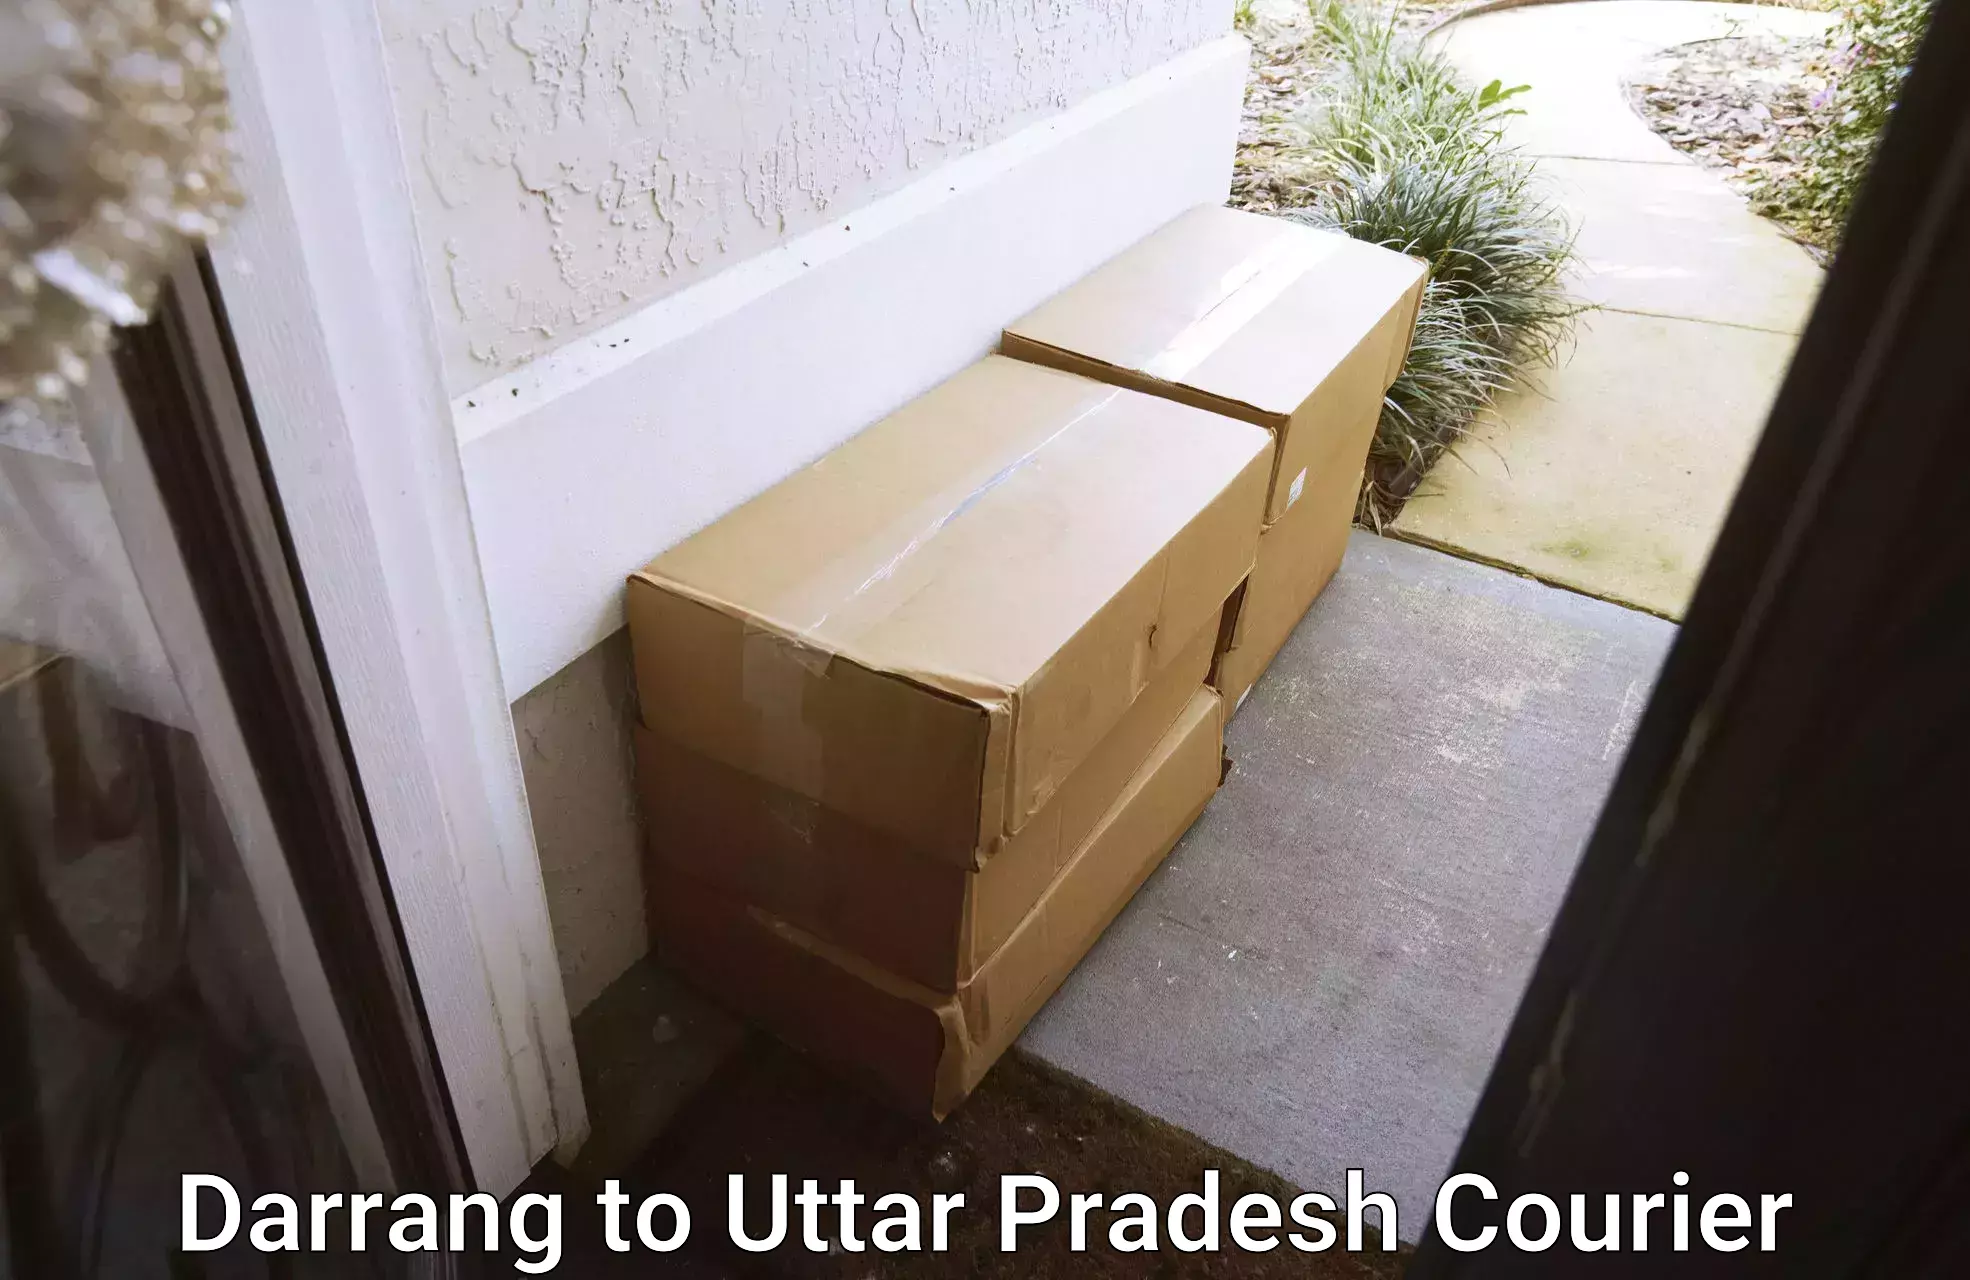 Nationwide parcel services Darrang to Mohammadabad